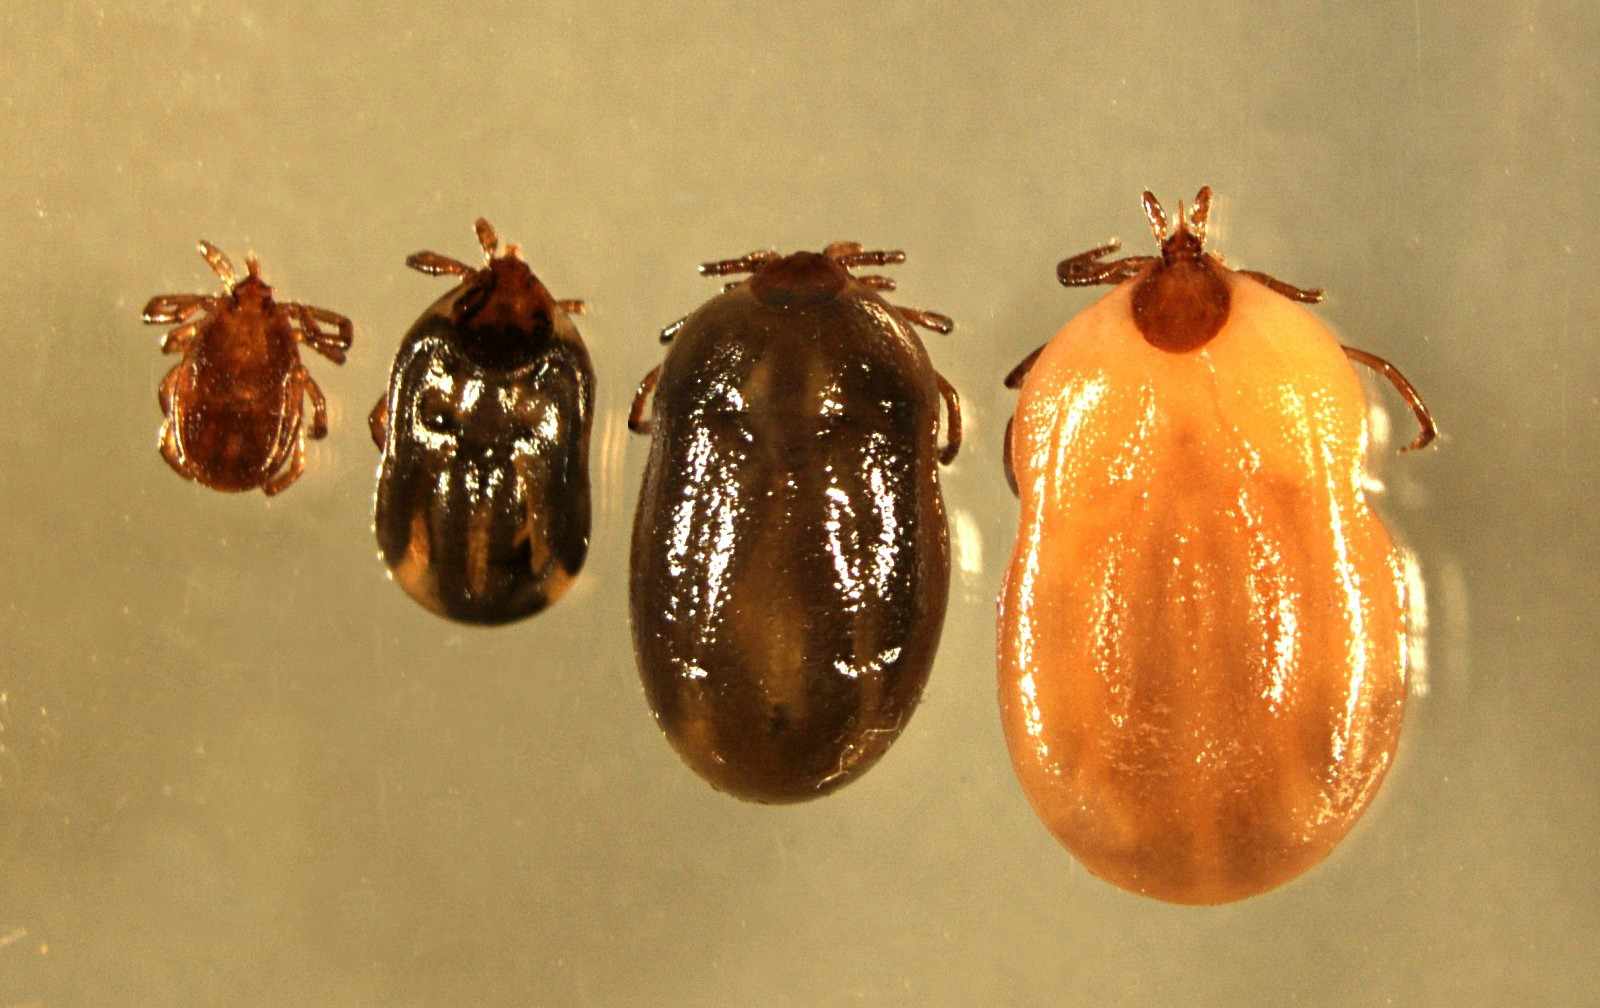 wood tick showing degree of engorgement